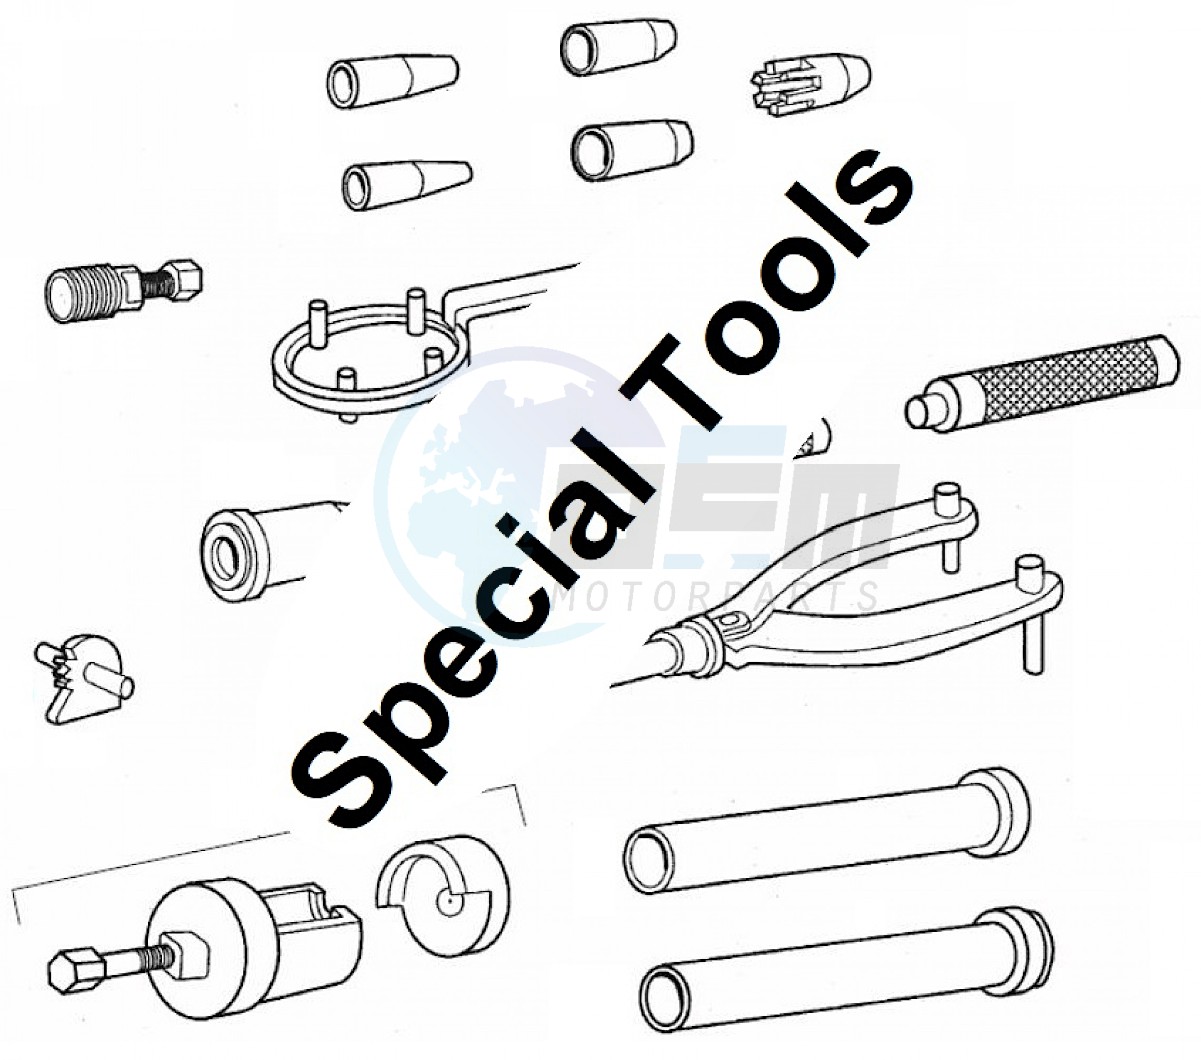 Special tools (Positions) image